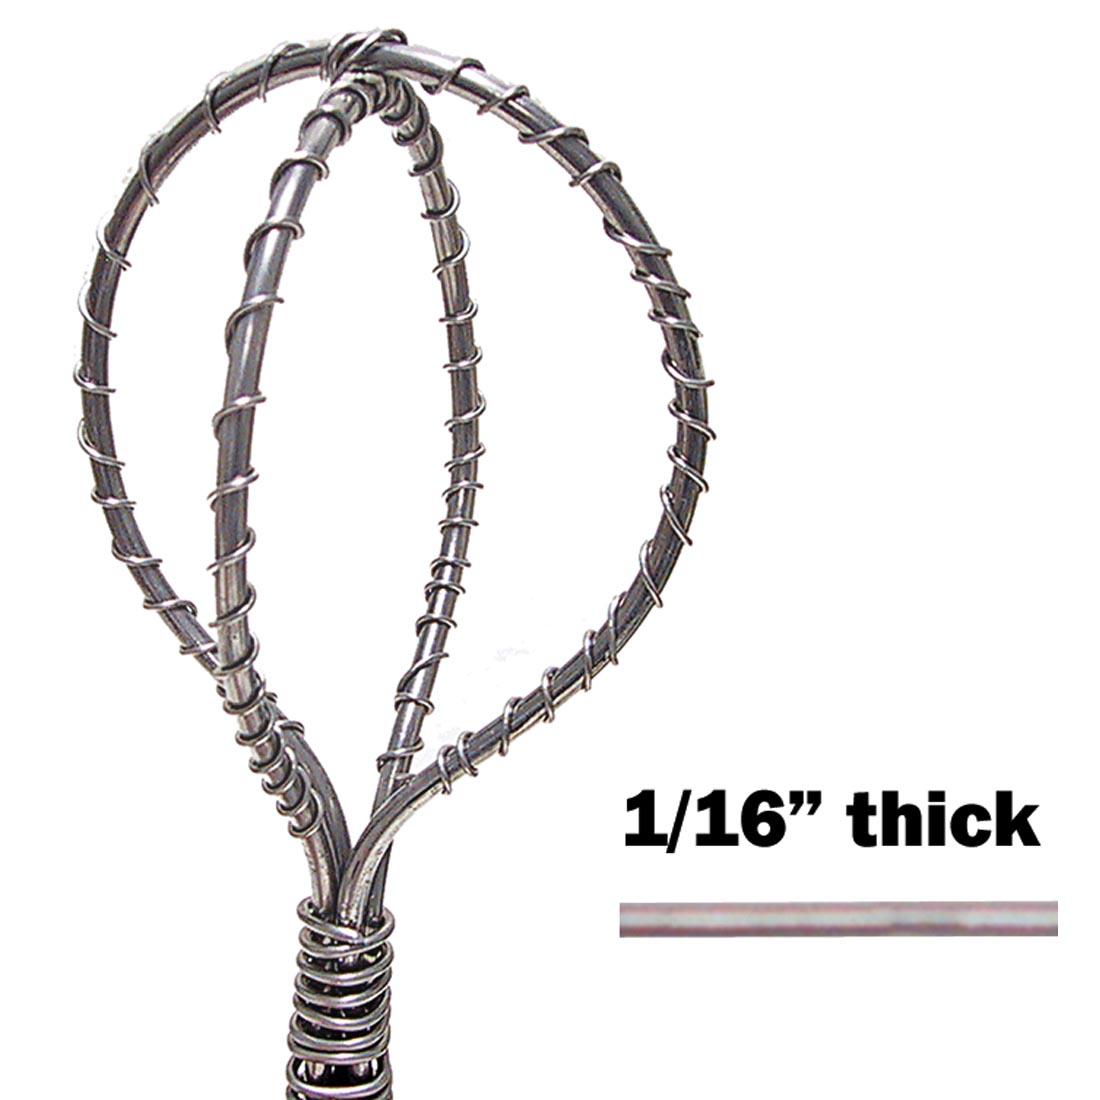 armature made with Armature Wire with text 1/16" thick